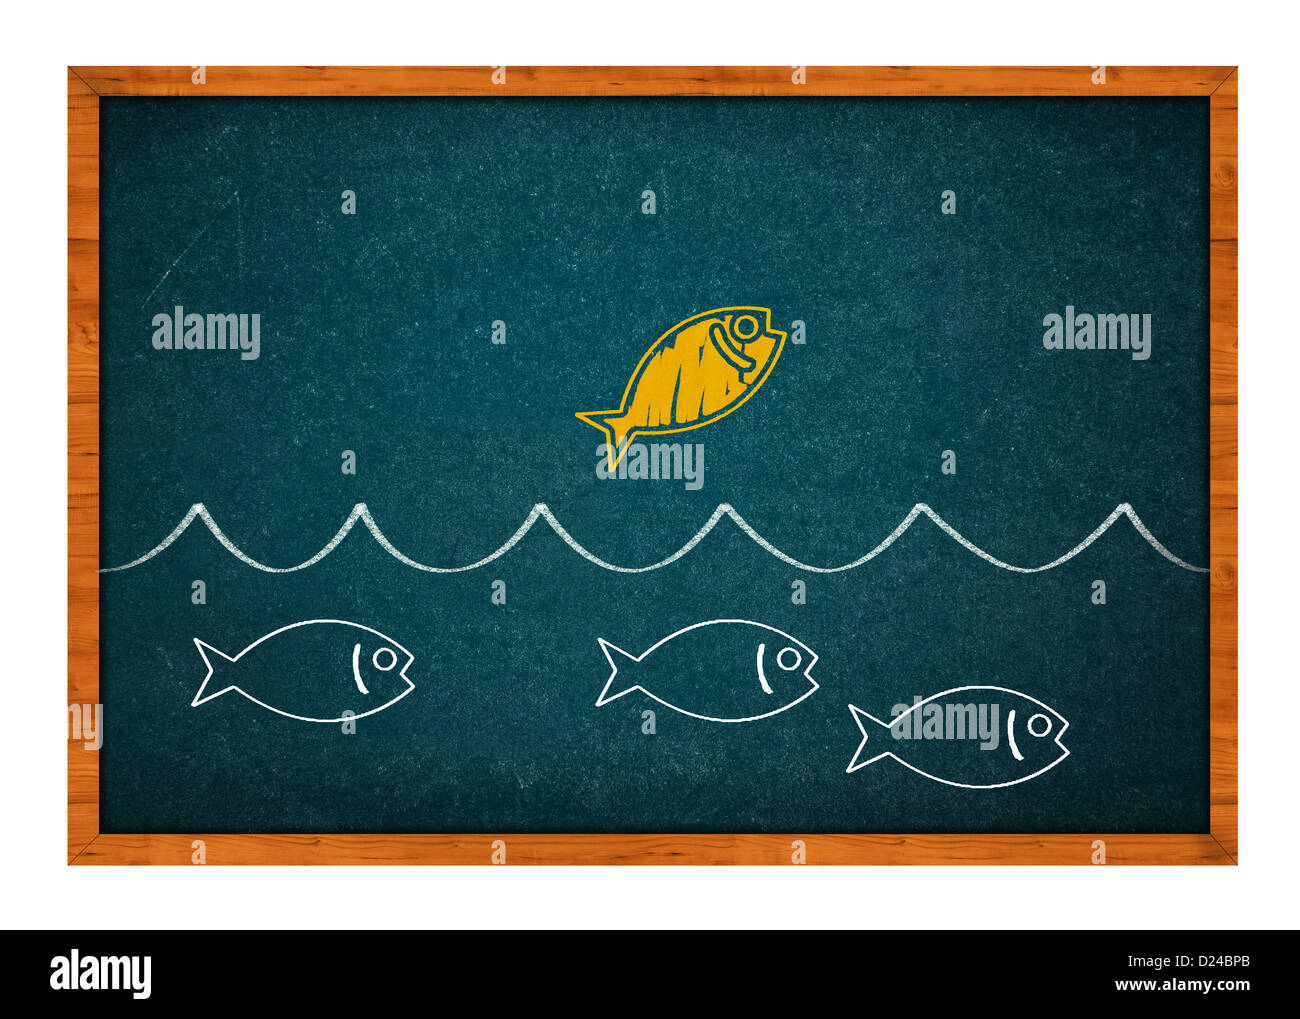 Golden fish jumping from the water and taking advantage, drawing on a green chalkboard. Stock Photo